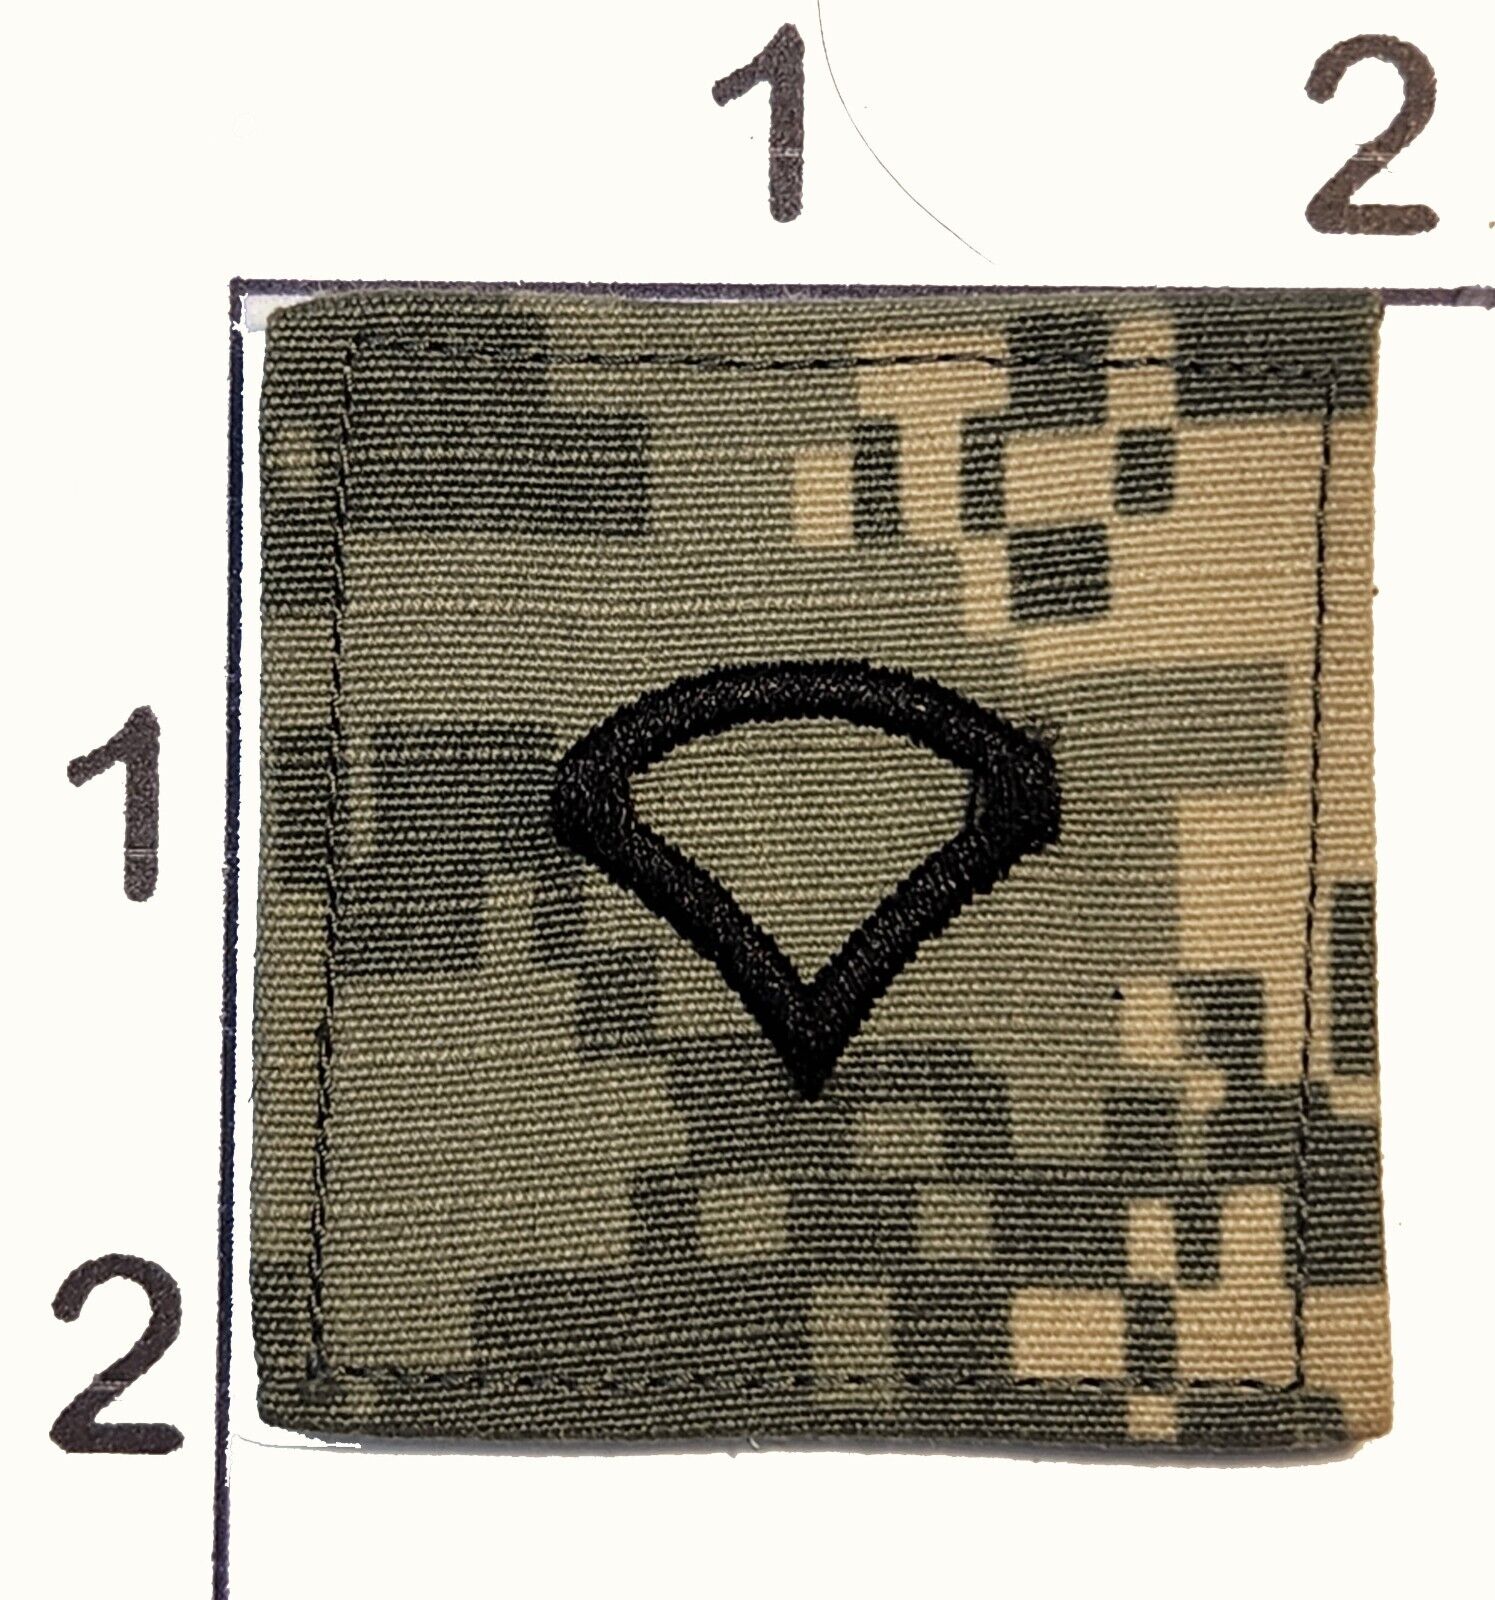 United States Army Private 1st Class Embroidered Rank Patch Hook Loop Camoflauge